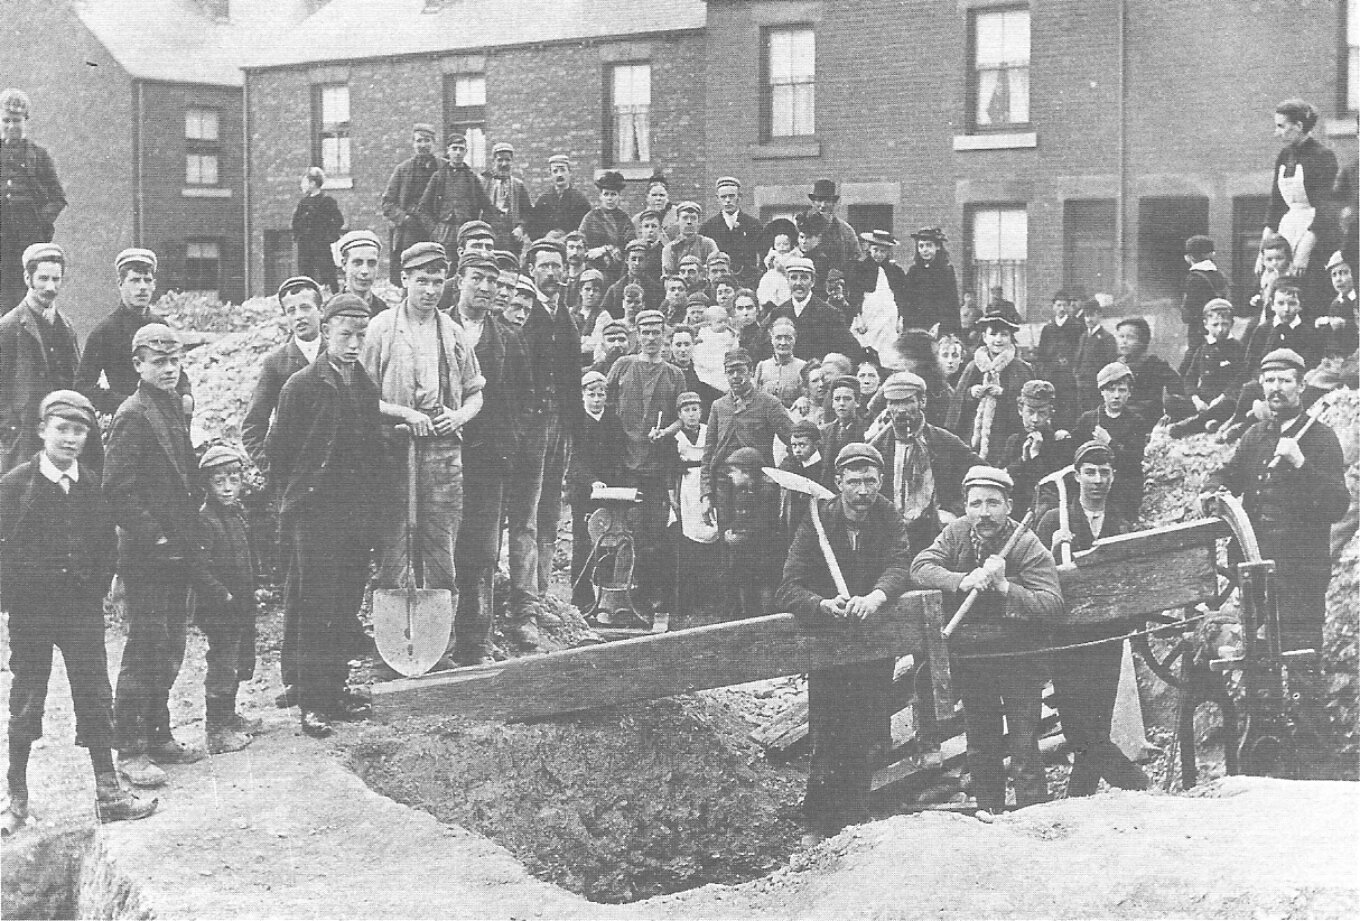 A black and white photograph of a group of mostly men and boys with tools and a hole in the ground.